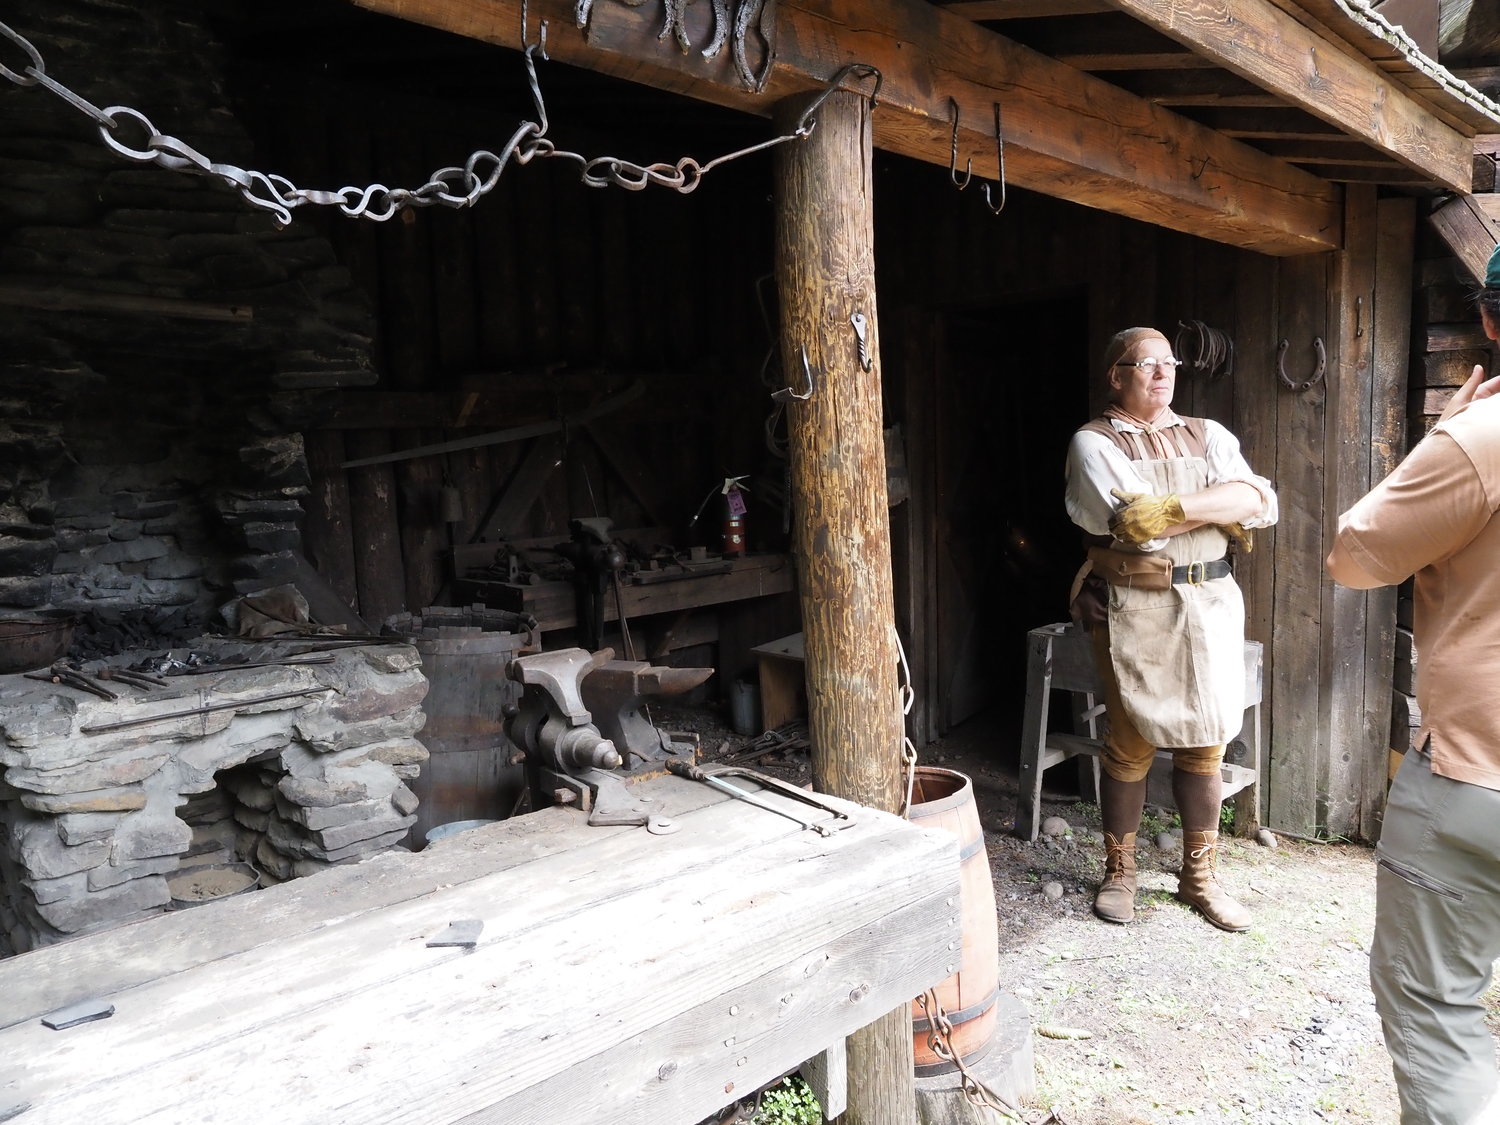 The blacksmith shop was operated by Anthony Domingo, a member of the Navasing Long Rifles reenactment group based in Thompsonville.